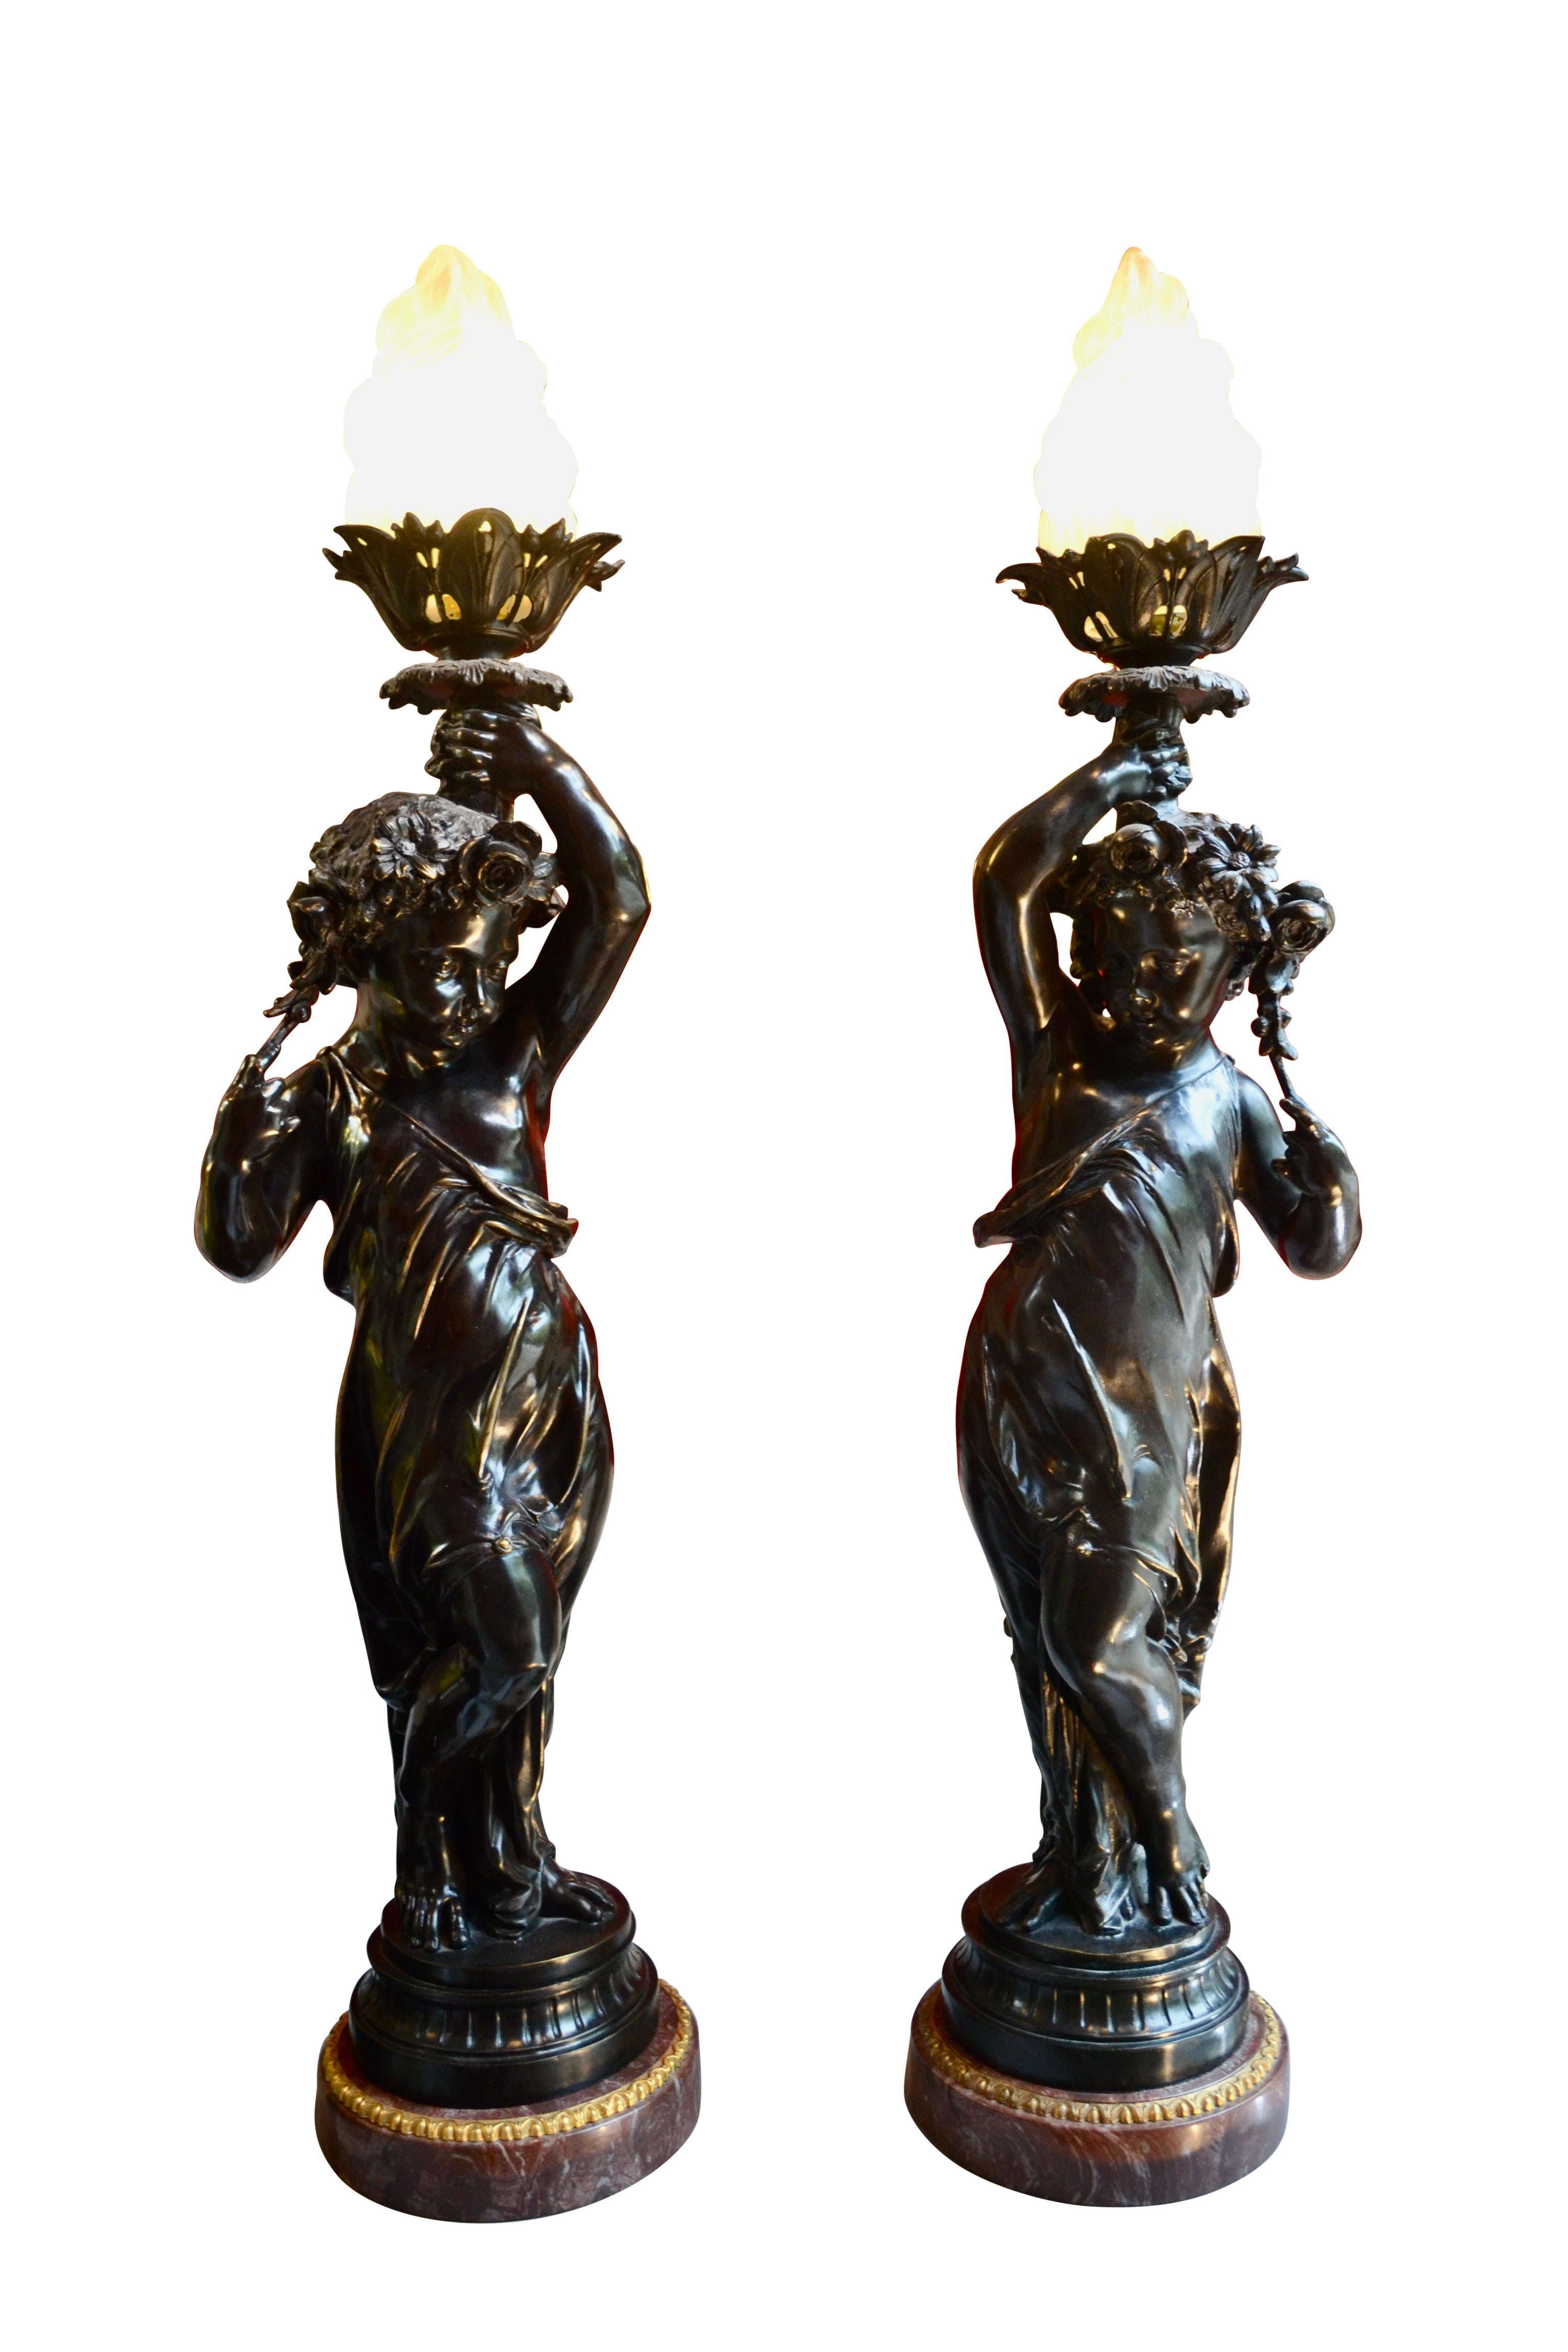 A beautifully cast matching pair of patinated bronze figural torcheres in the manner of Clodion modeled as classically draped young girls with garlands of flowers in their hair and holding aloft a flame torch. Set on a round marble base with gilt